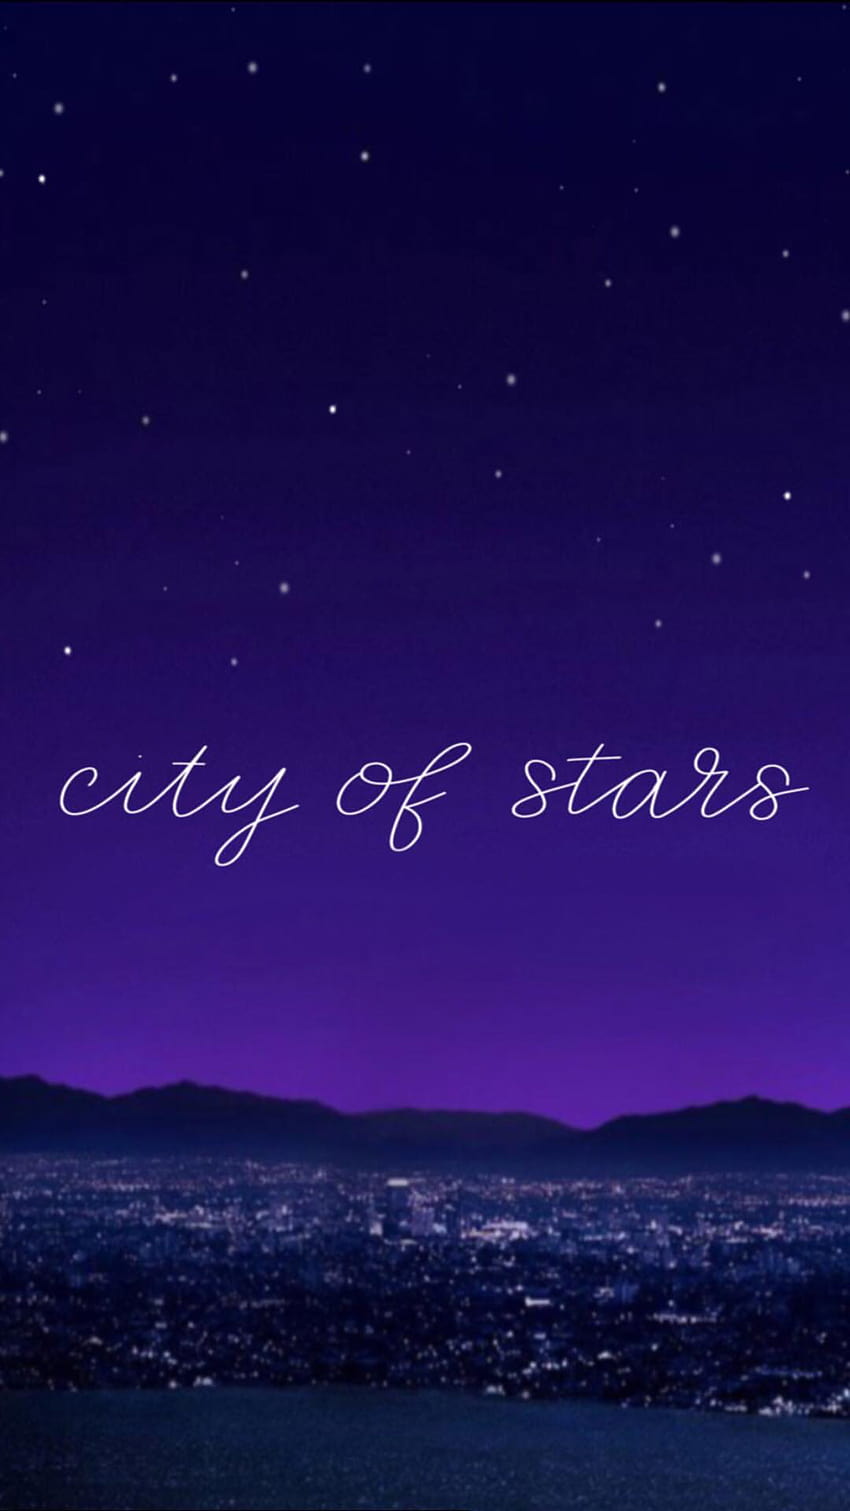 Wallpaper Music, The city, Star, Style, Building, Background, City, Star  for mobile and desktop, section рендеринг, resolution 3840x2160 - download